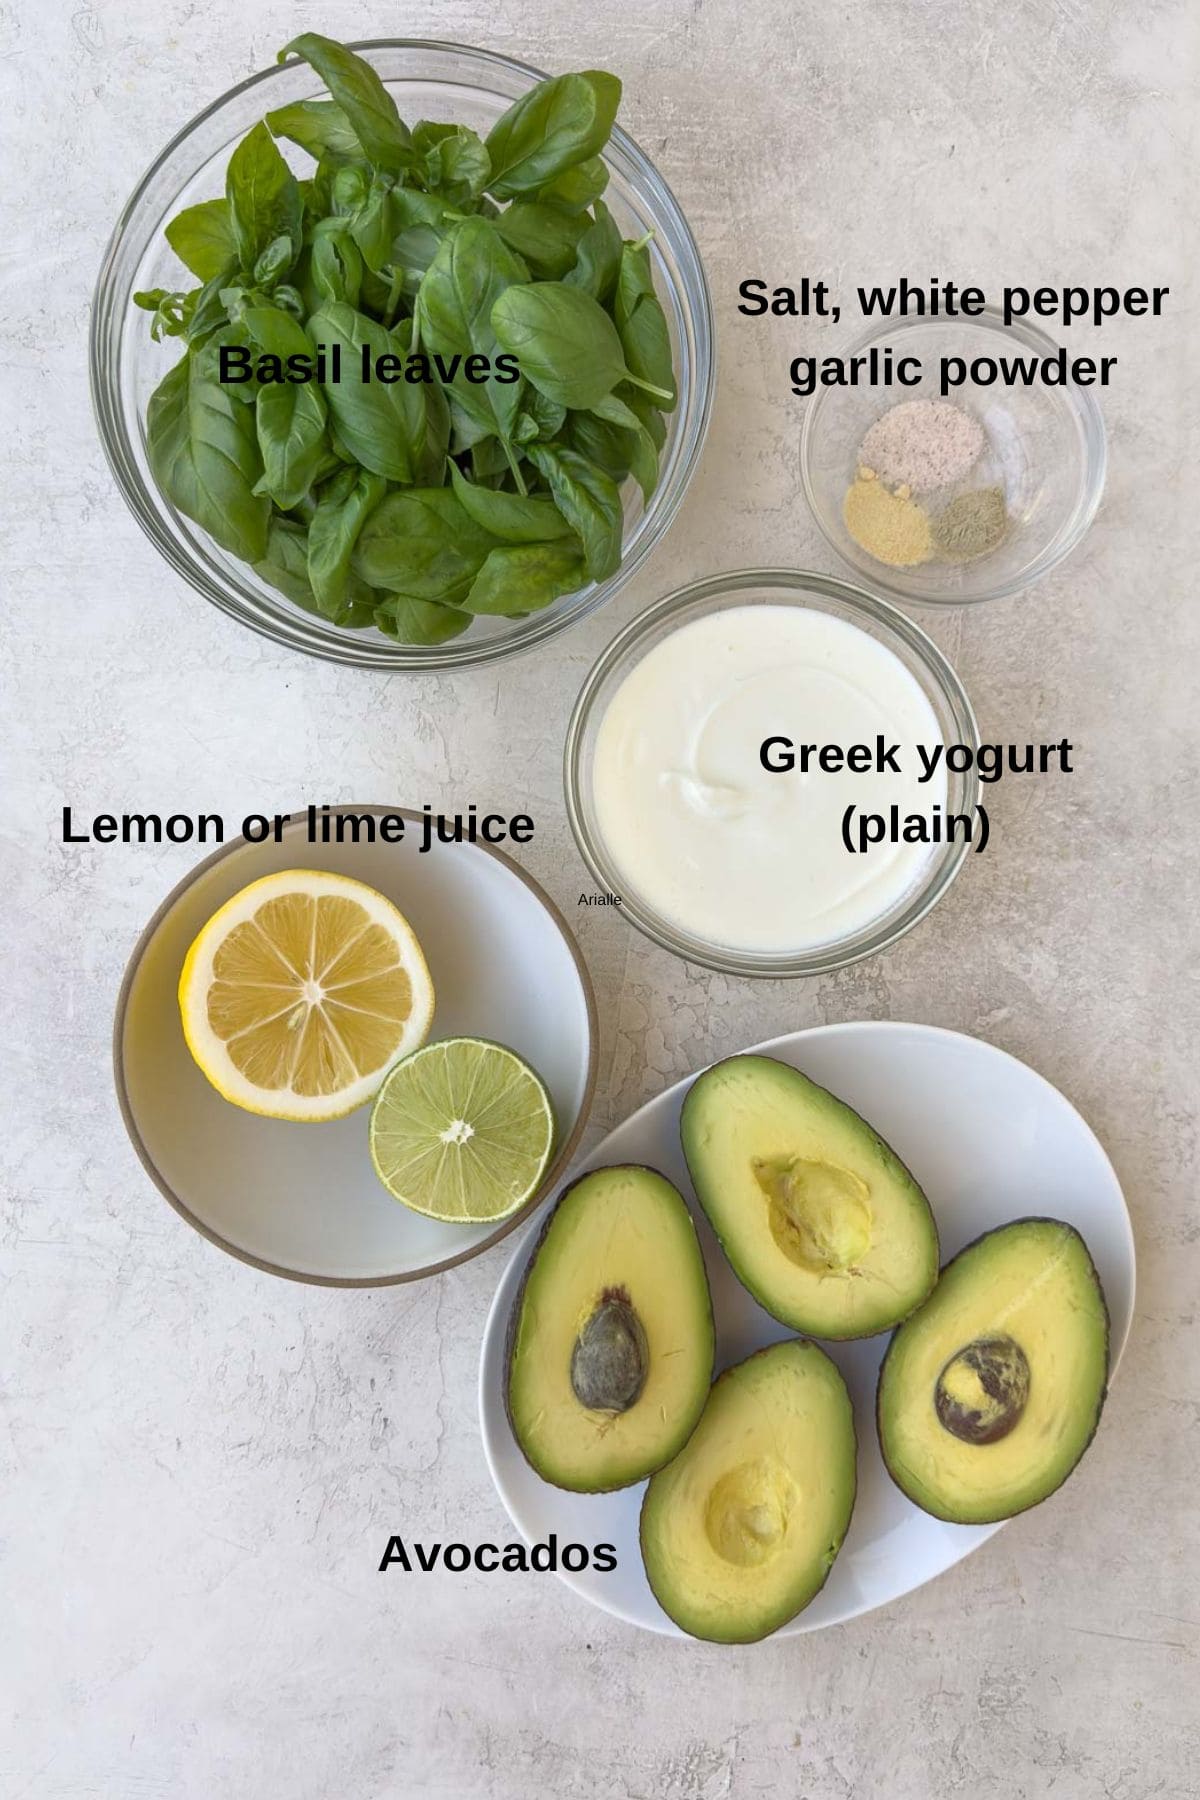 Ingredients for creamy avocado dip with basil.